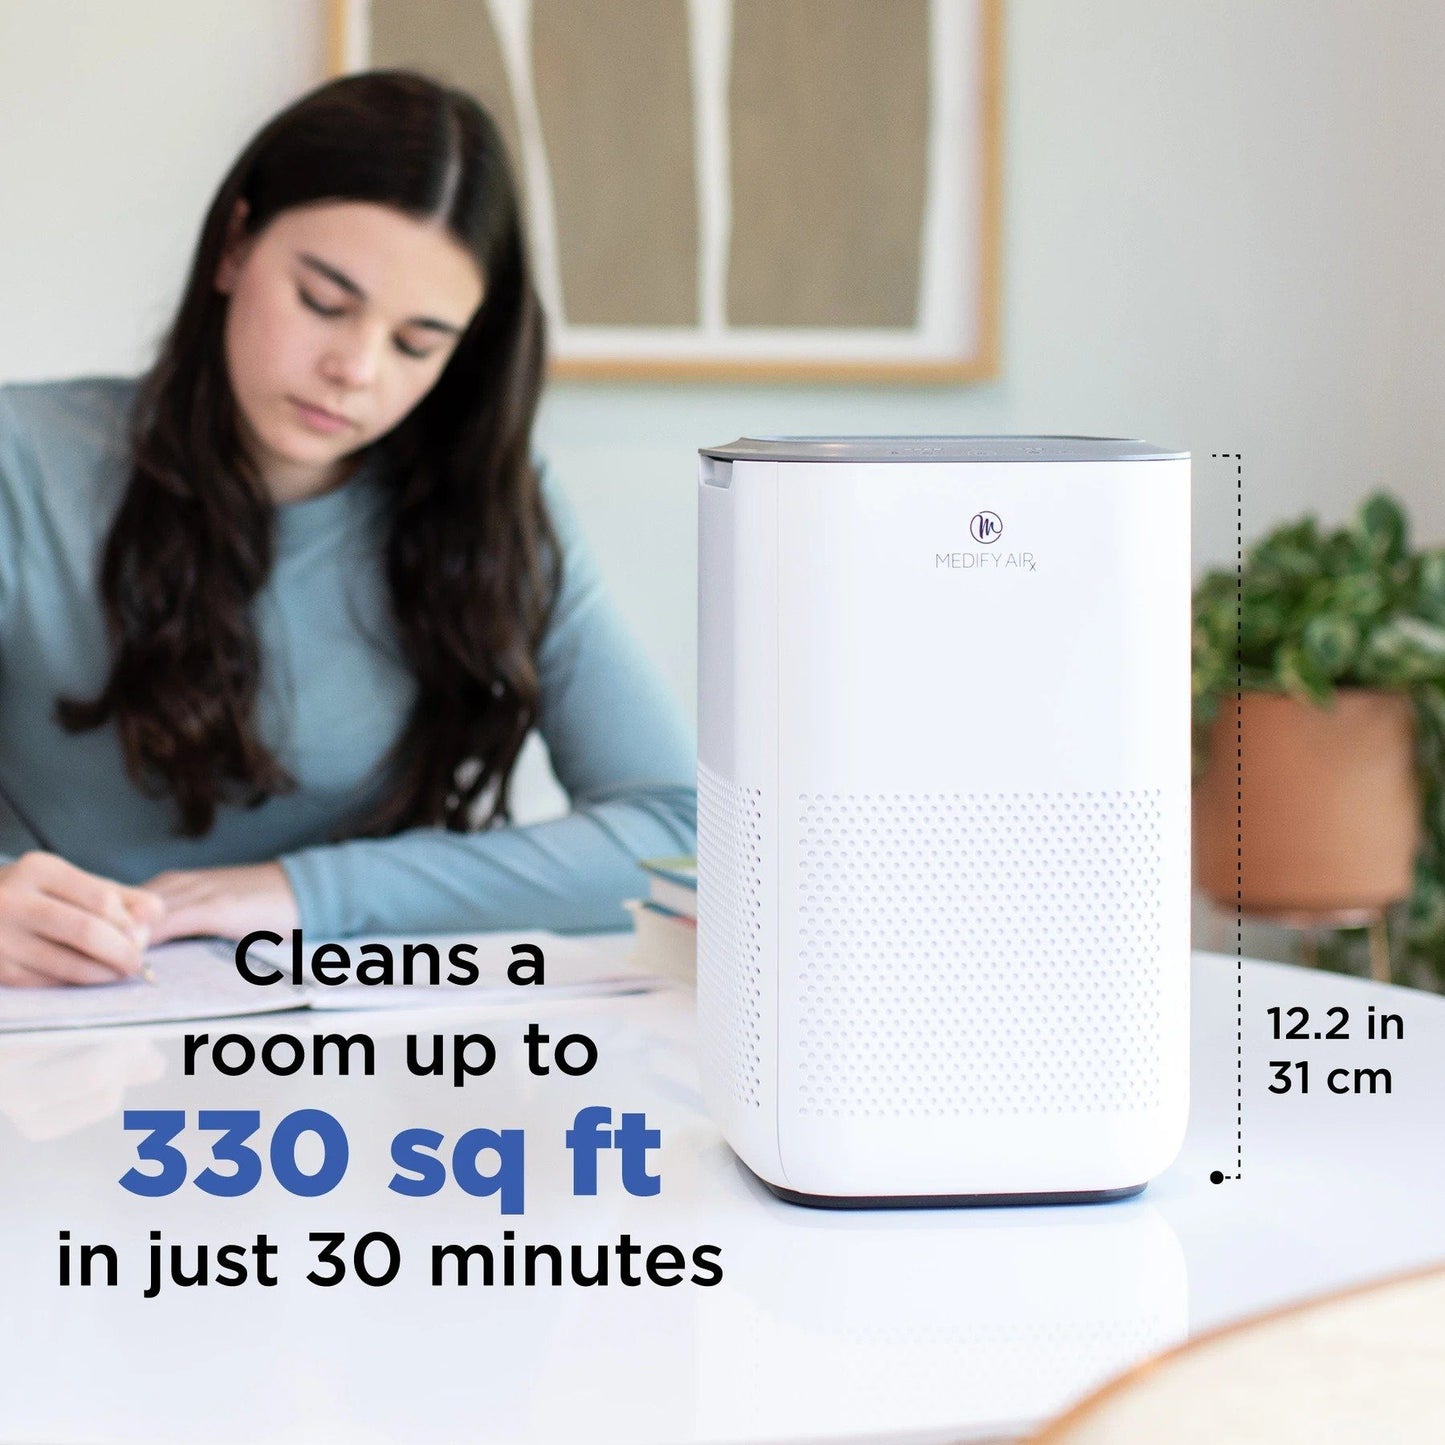 The Medify Air MA-15 uses True HEPA H13 filters with three layers of filtration: pre-filter, H13 True HEPA, and active carbon composite for odors.